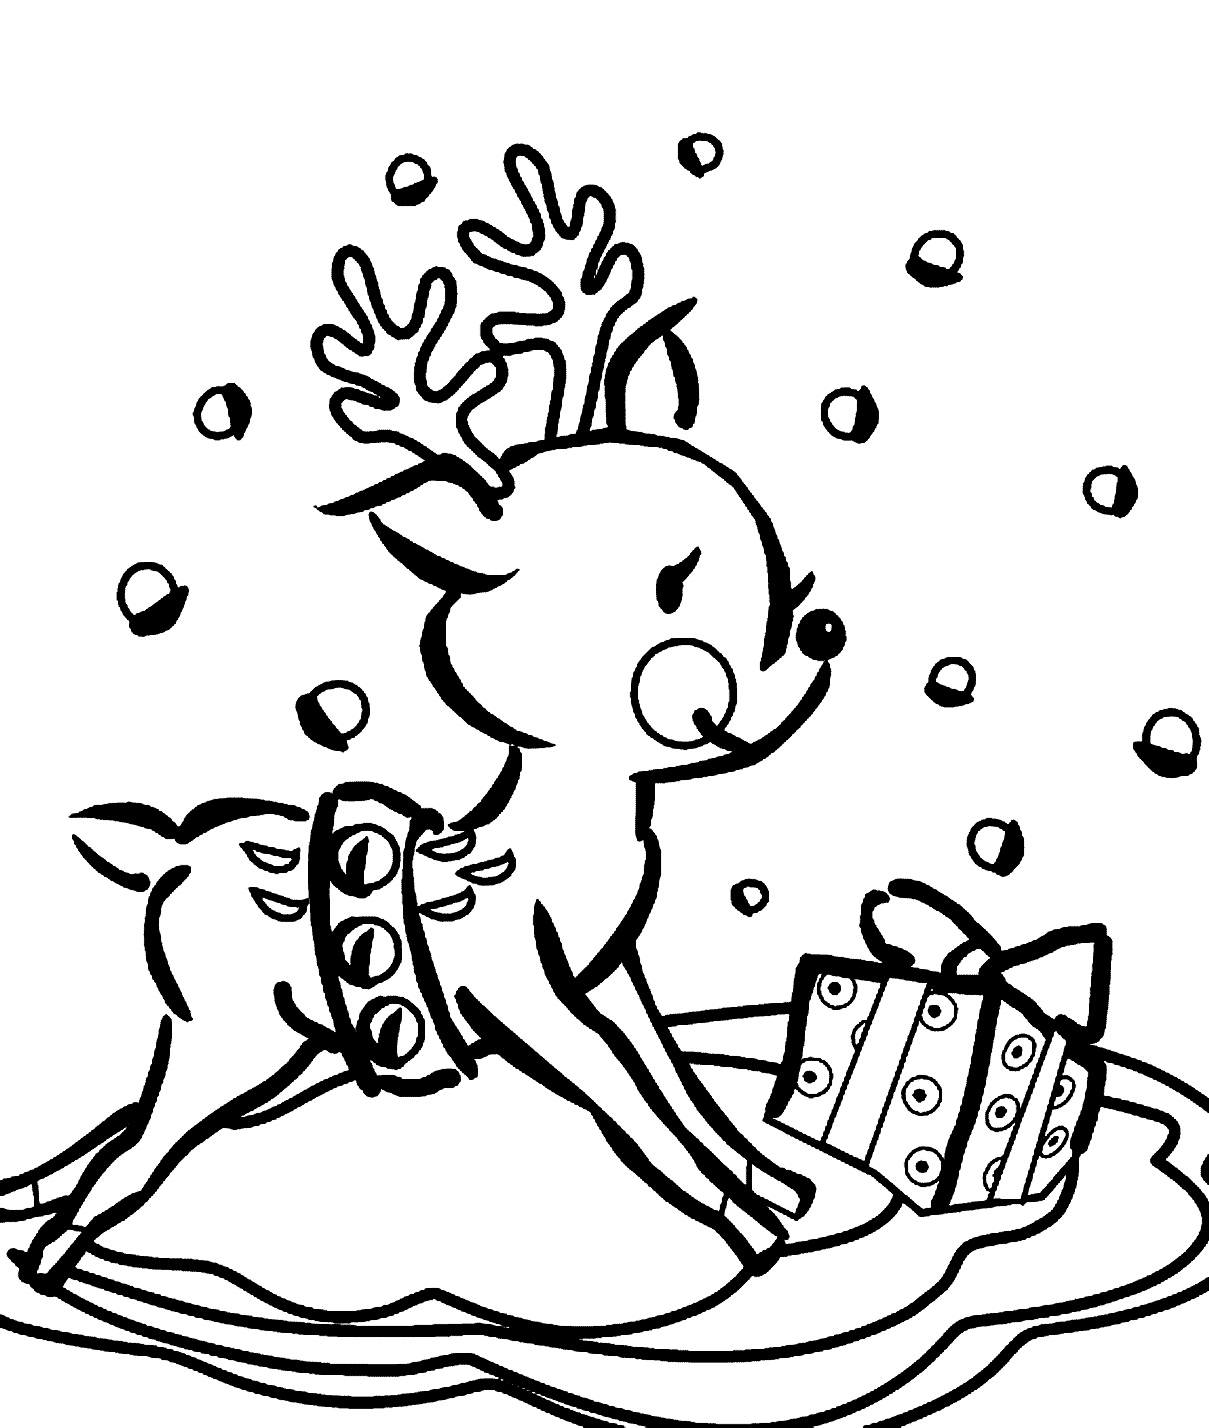 Coloring Pages For Christmas Reindeer at Free